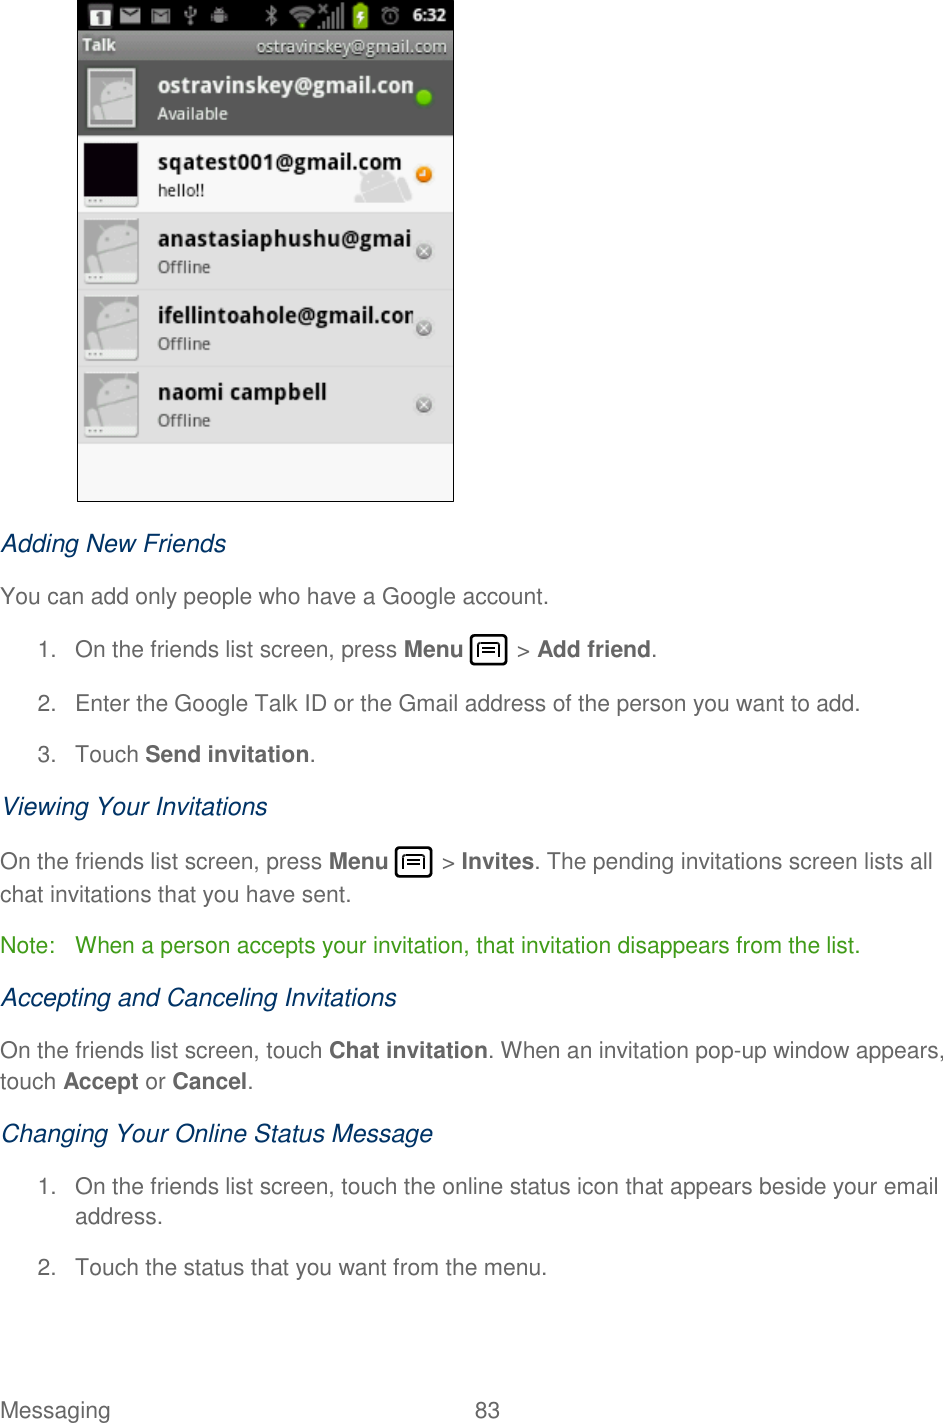 Messaging  83    Adding New Friends You can add only people who have a Google account. 1.  On the friends list screen, press Menu   &gt; Add friend. 2.  Enter the Google Talk ID or the Gmail address of the person you want to add. 3.  Touch Send invitation. Viewing Your Invitations On the friends list screen, press Menu   &gt; Invites. The pending invitations screen lists all chat invitations that you have sent. Note:  When a person accepts your invitation, that invitation disappears from the list. Accepting and Canceling Invitations On the friends list screen, touch Chat invitation. When an invitation pop-up window appears, touch Accept or Cancel. Changing Your Online Status Message 1.  On the friends list screen, touch the online status icon that appears beside your email address. 2.  Touch the status that you want from the menu. 